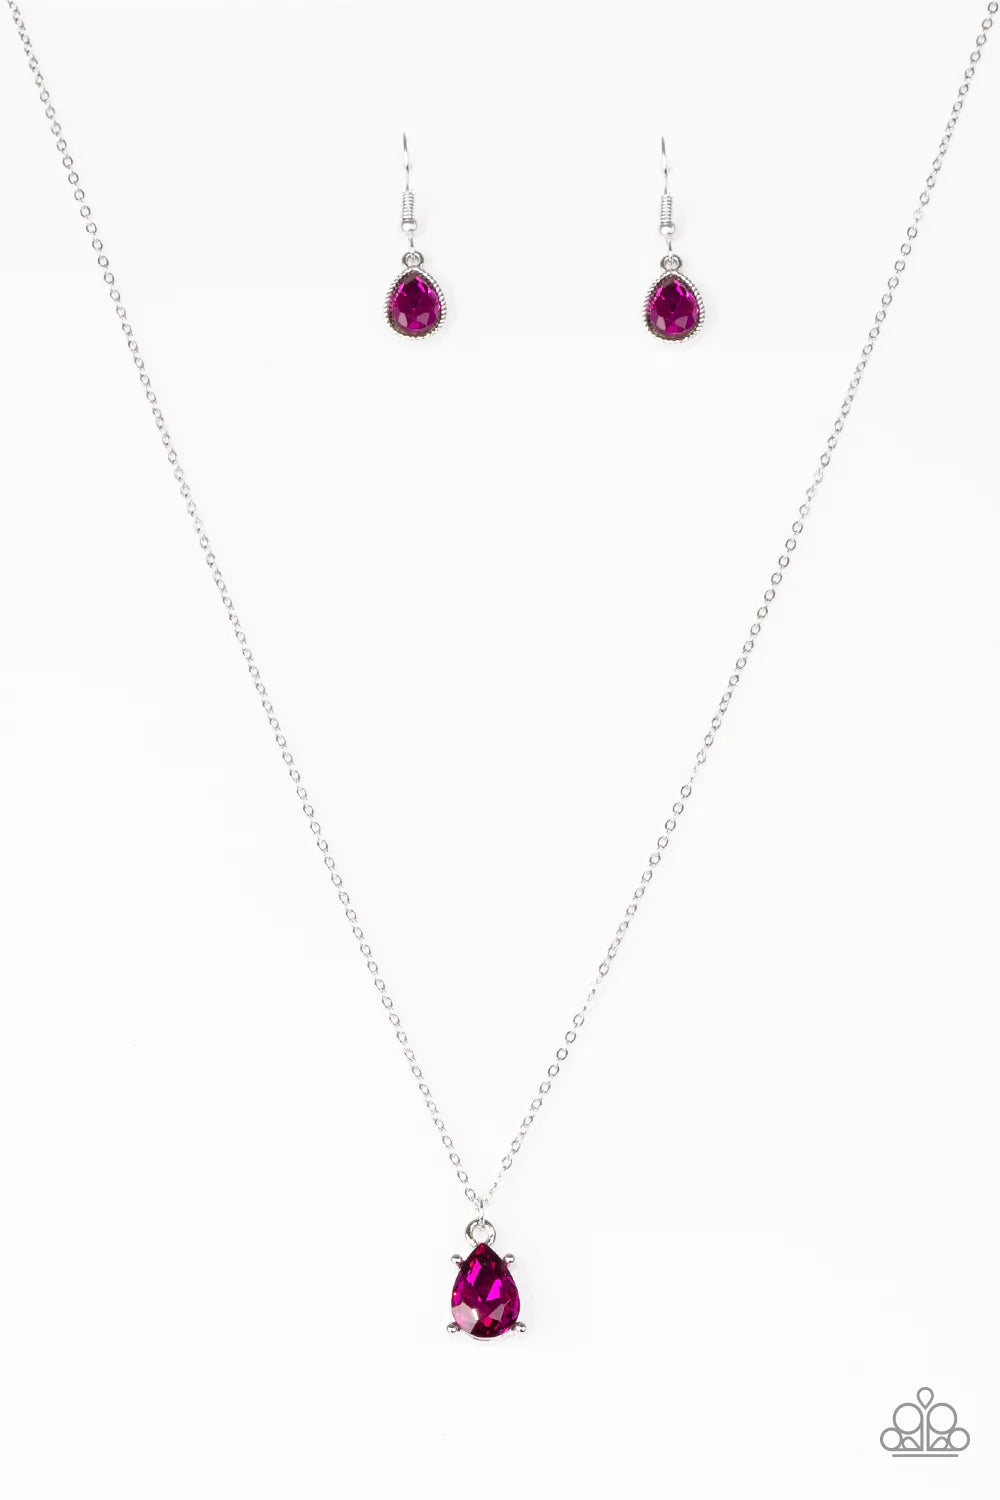 Paparazzi Necklace ~ Classy Classicist - Pink